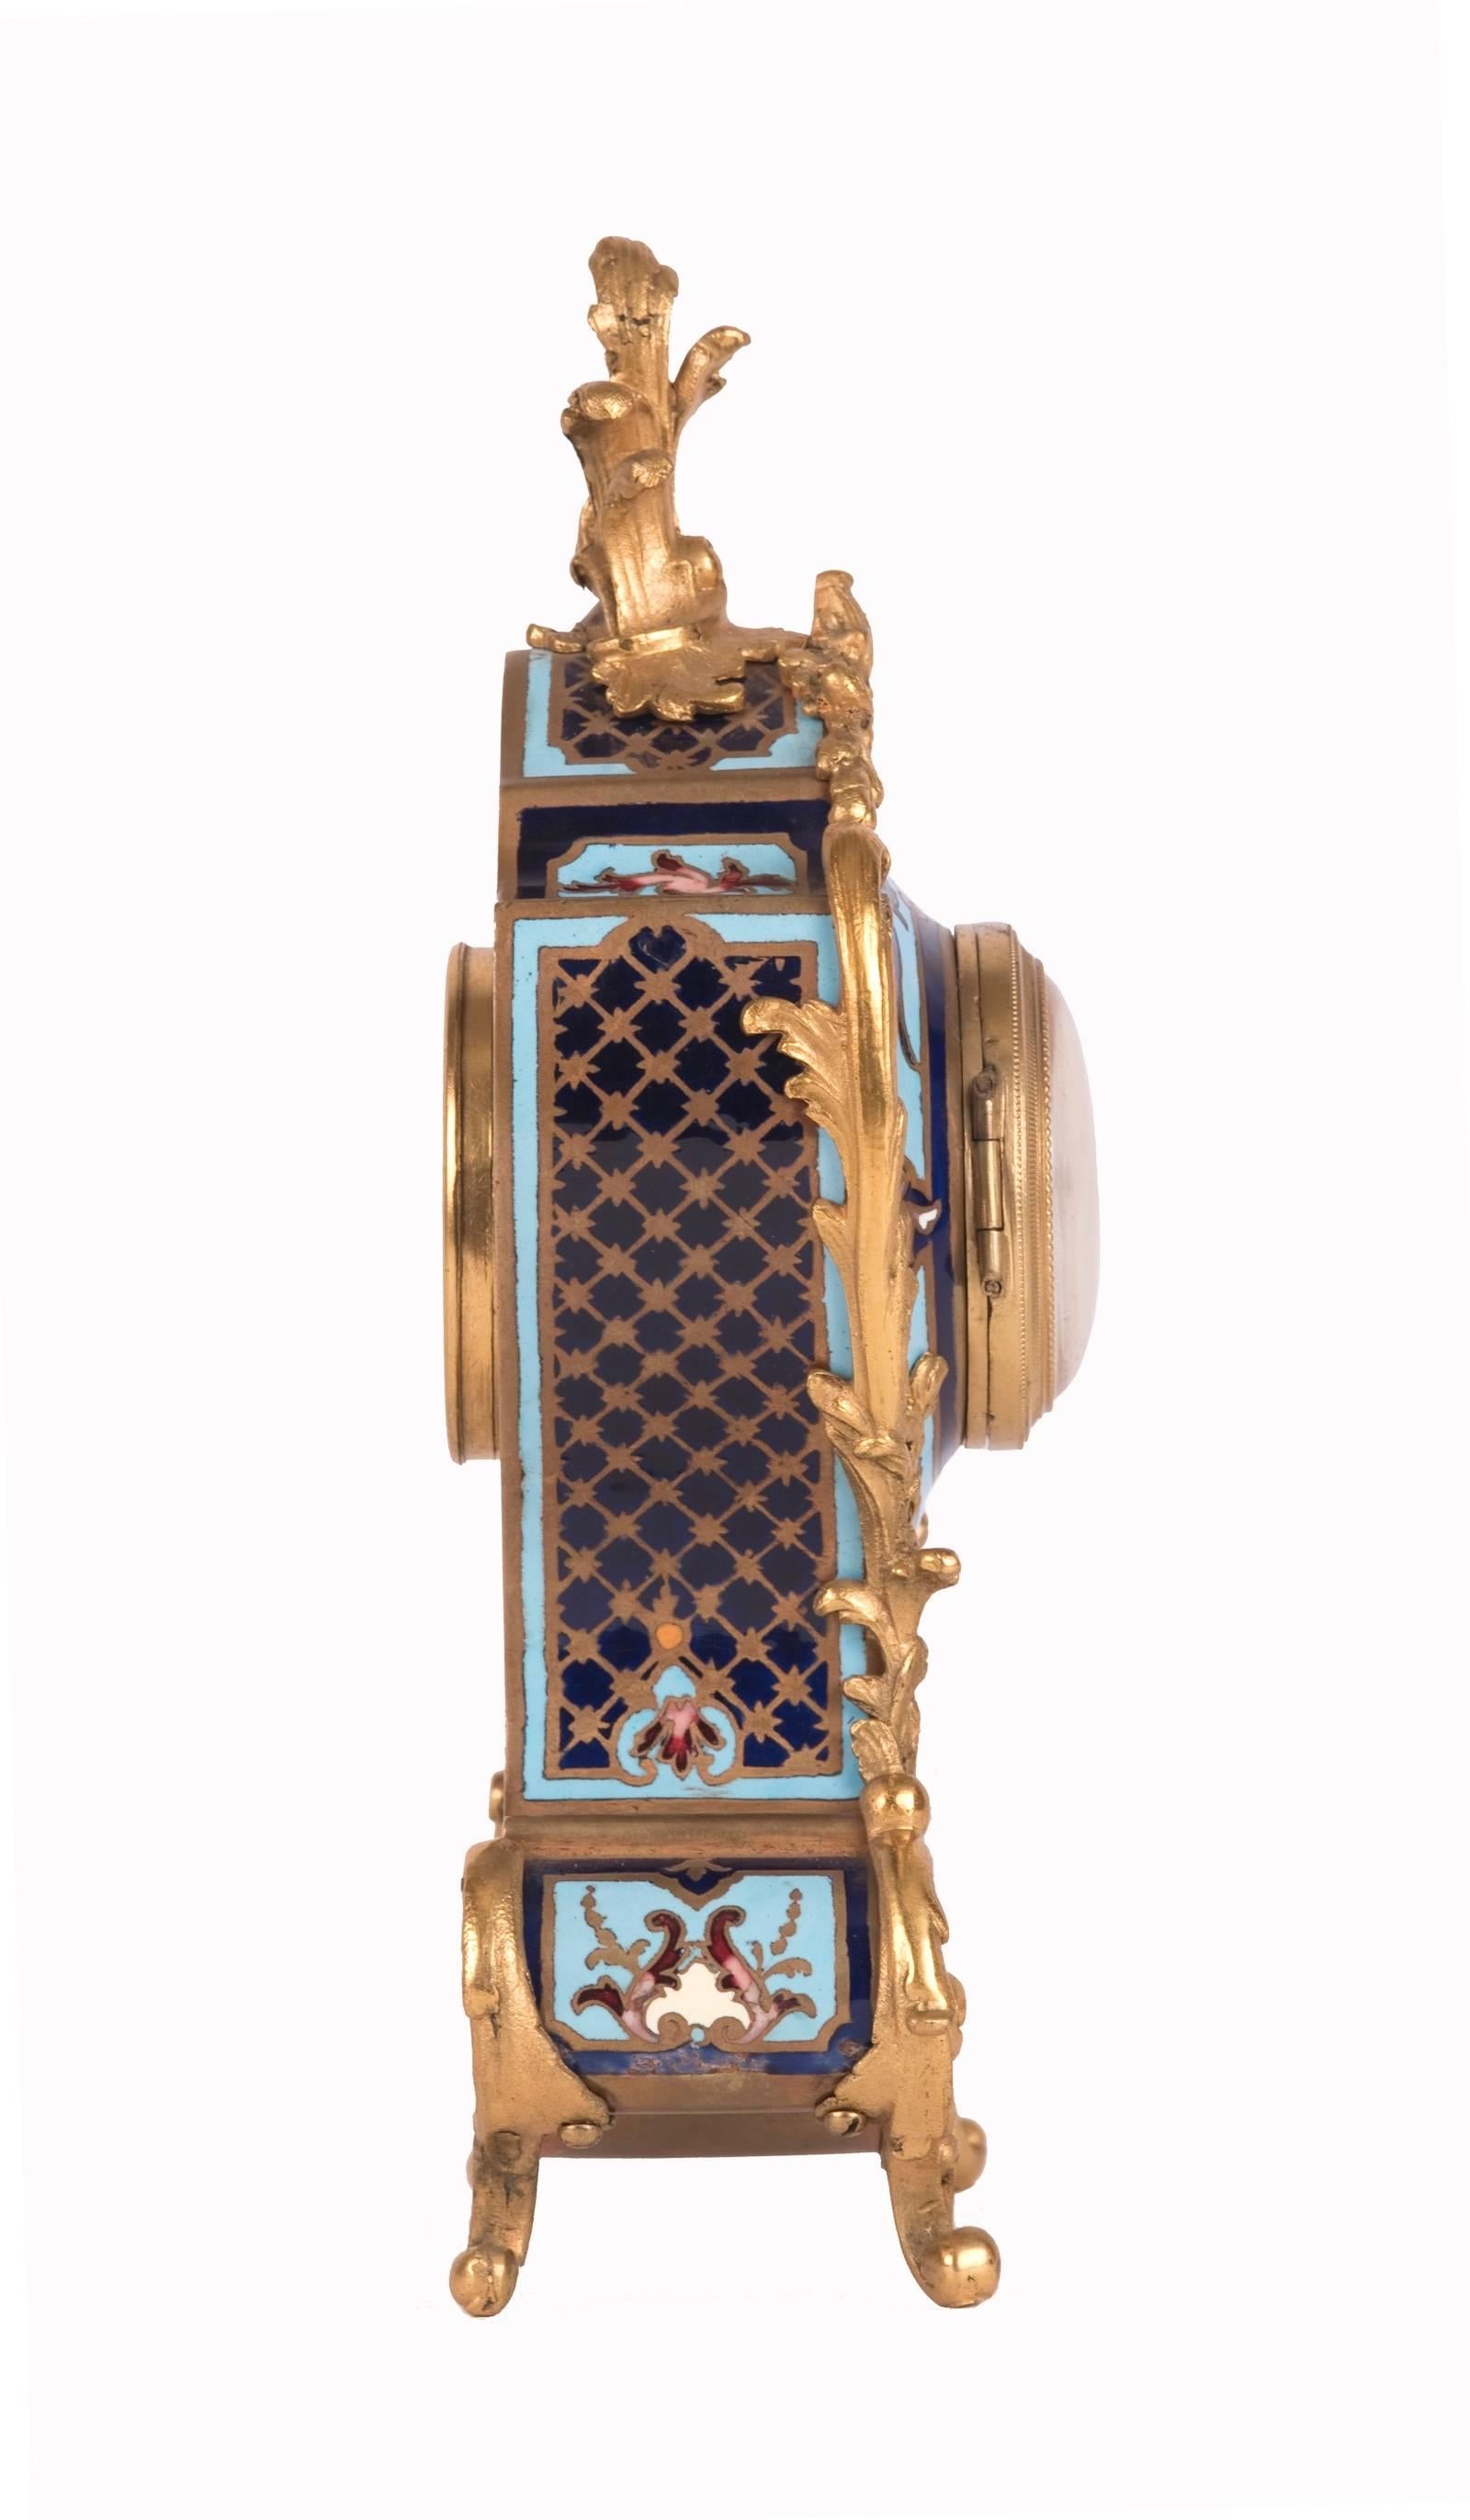 French Louis XV Style Cloisonné Gilt Bronze-Mounted Mantel Clock For Sale